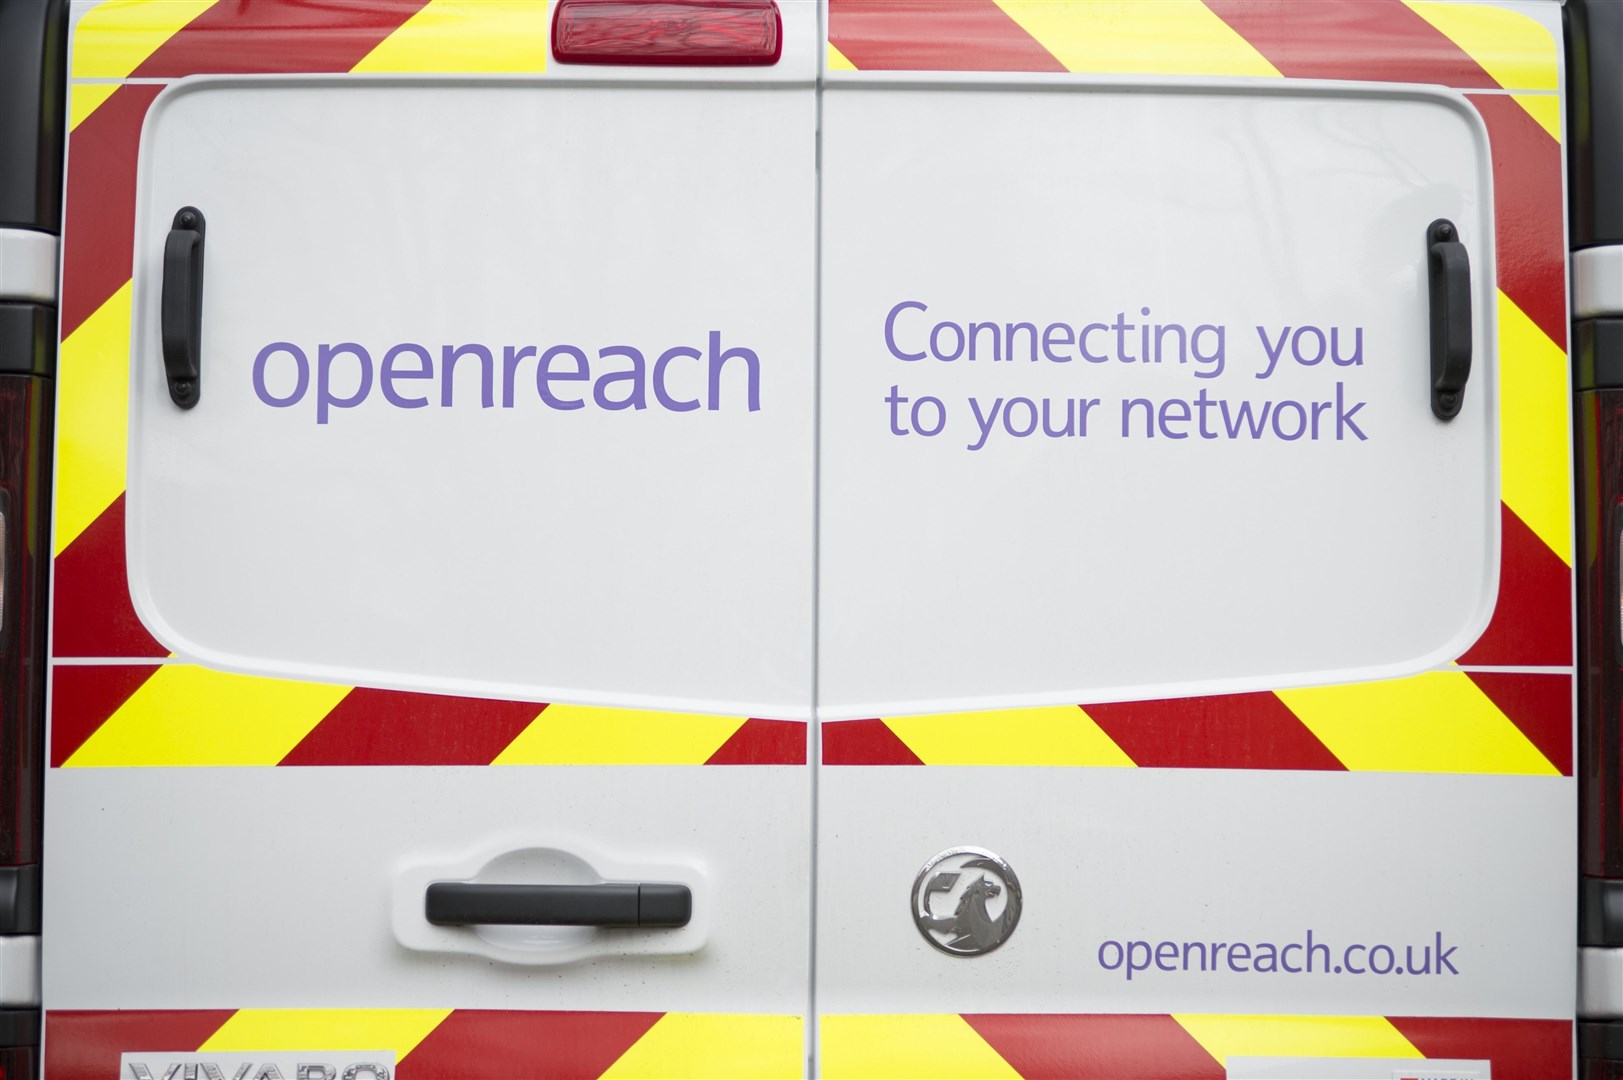 There was a long hold-up before Openreach was awarded deal in the end.